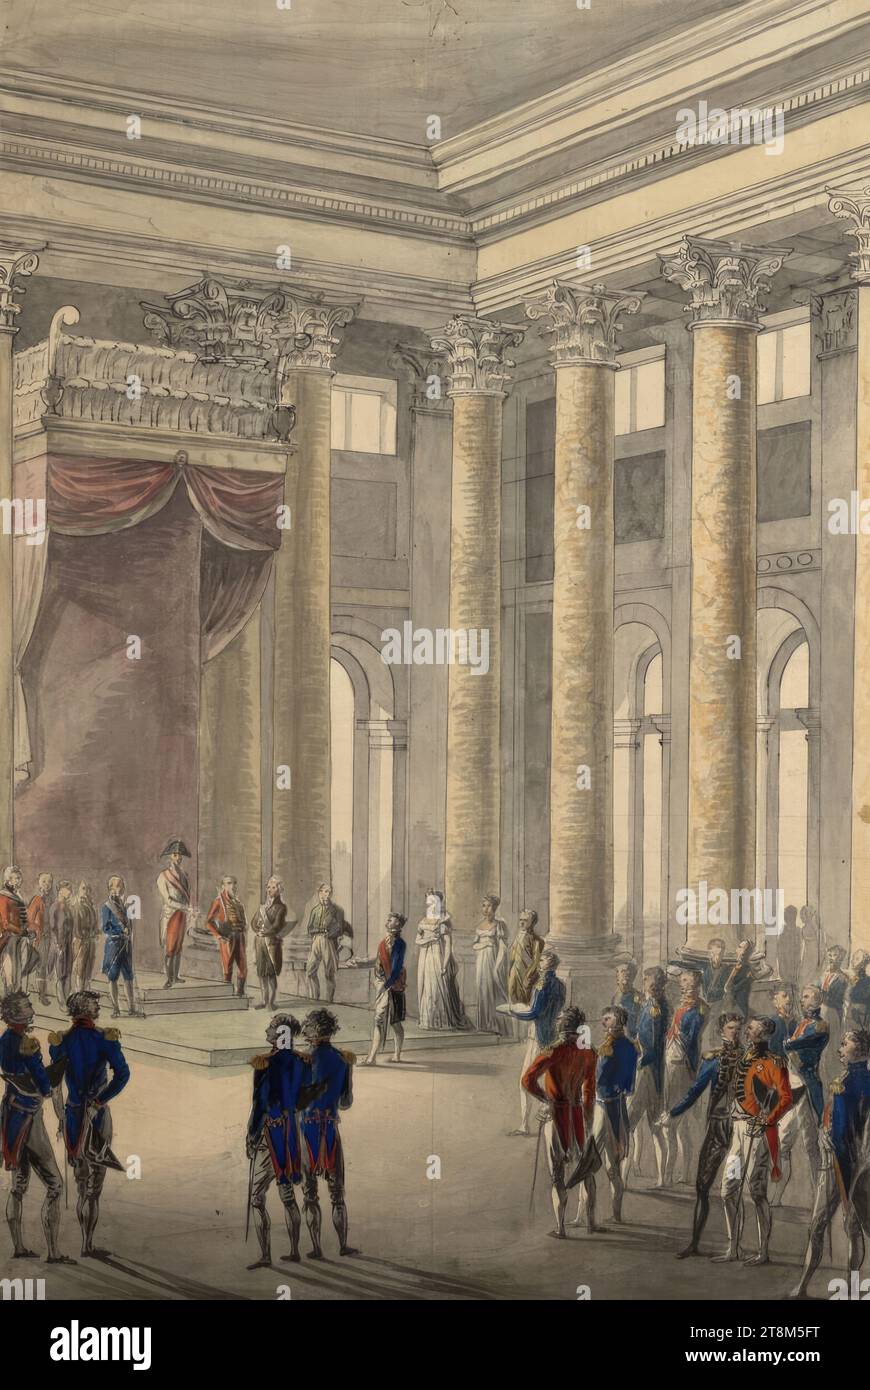 Napoleon courting Marie Louise, daughter of Emperor Franz II/I, in the ceremonial hall of the Festsaal/Montoyer wing of the Vienna Hofburg, Johann Nepomuk Höchle (Munich 1790 - 1835 Vienna), 1810, drawing, watercolor and gouache, Black pen, over pencil, 49.9 x 33.5 cm Stock Photo